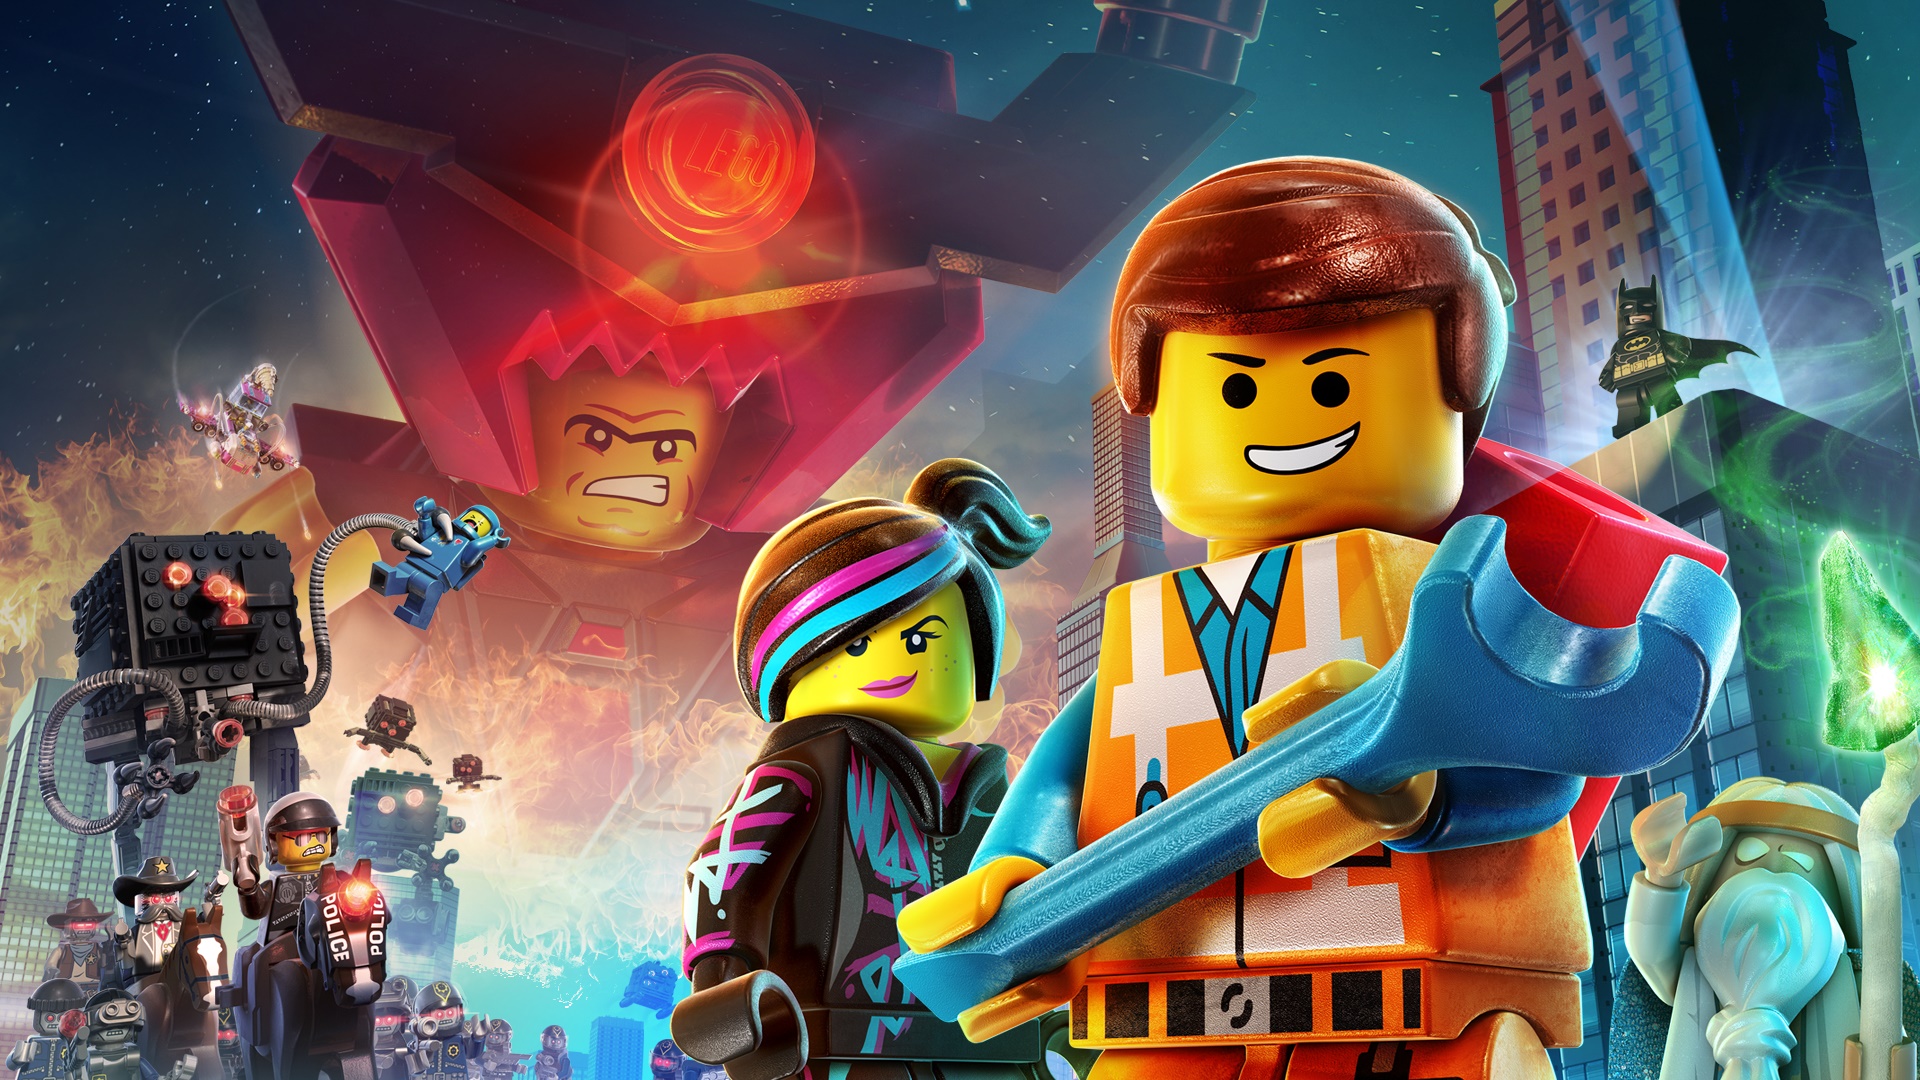 The Lego Movie 2014 HD Wallpapers 1920x1080